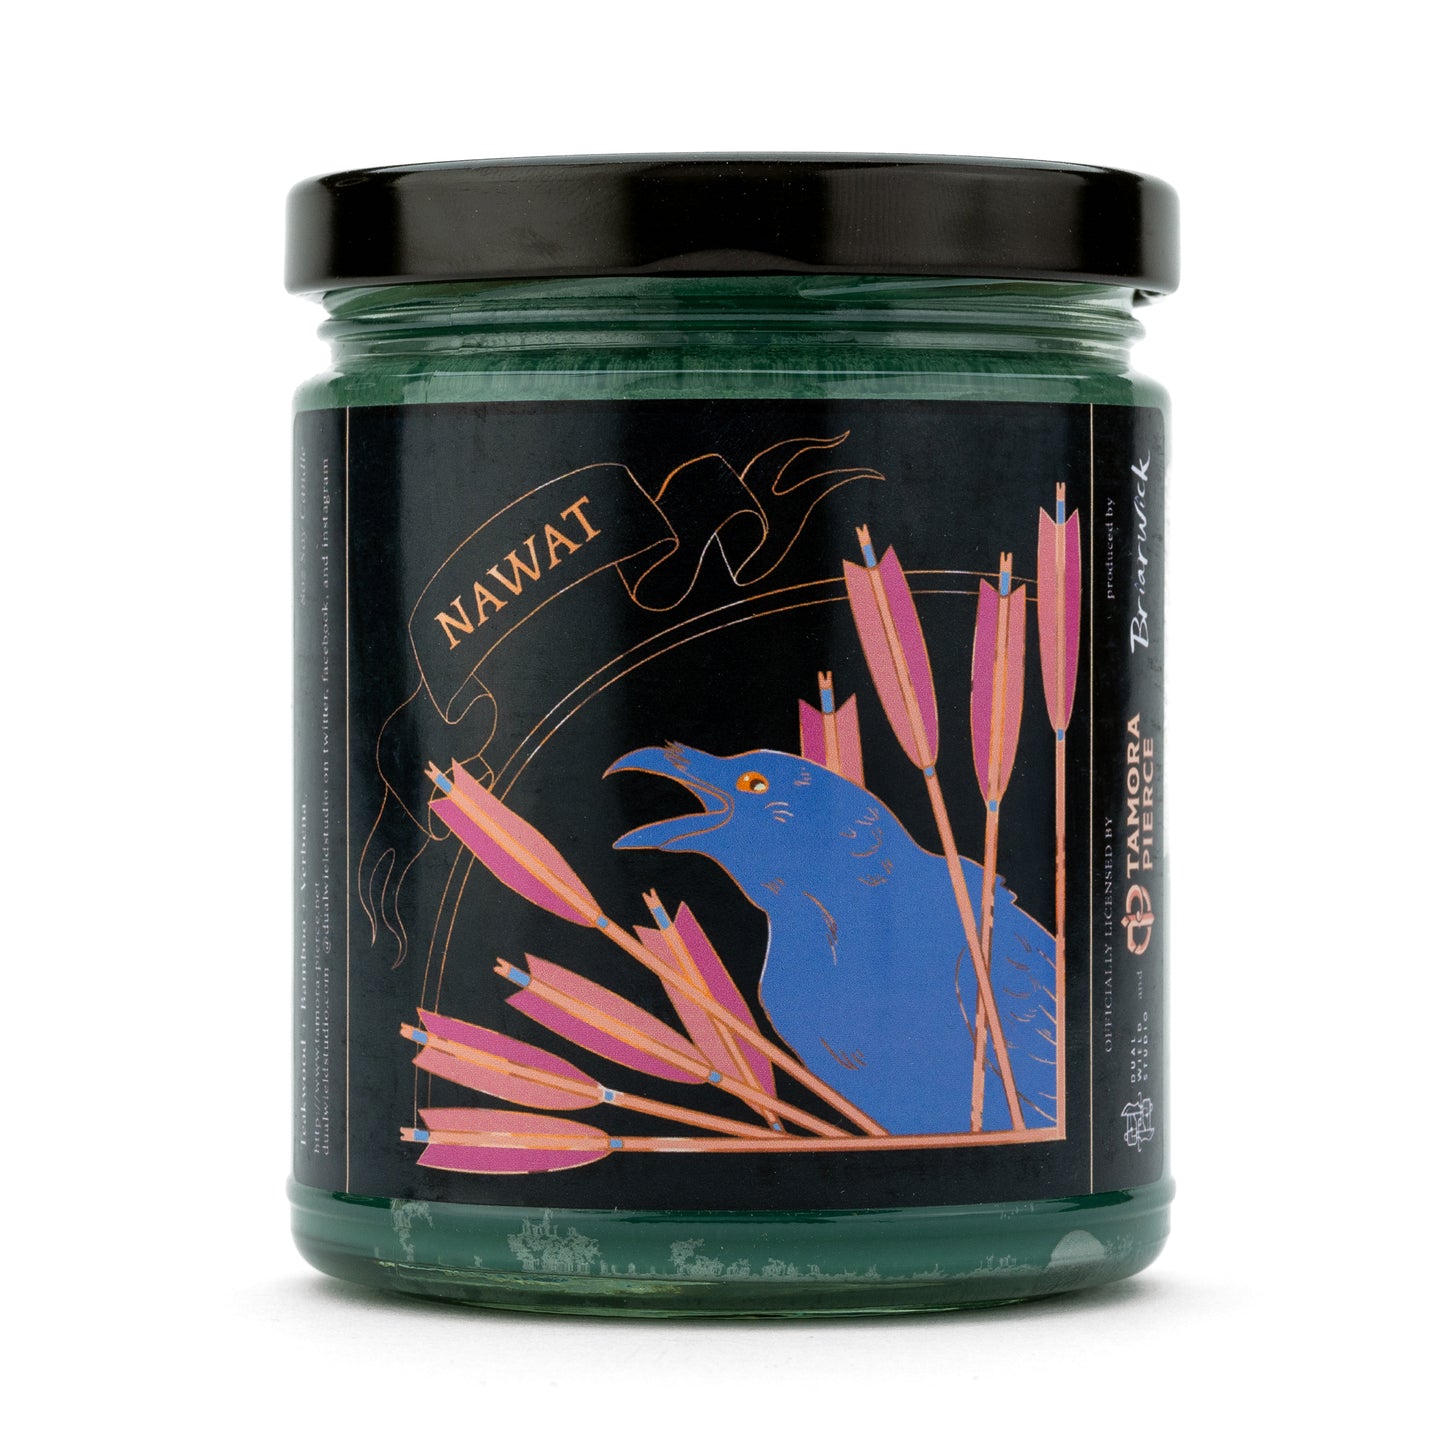 Nawat Candle - Tamora Pierce Officially Licensed - Soy Vegan Candle